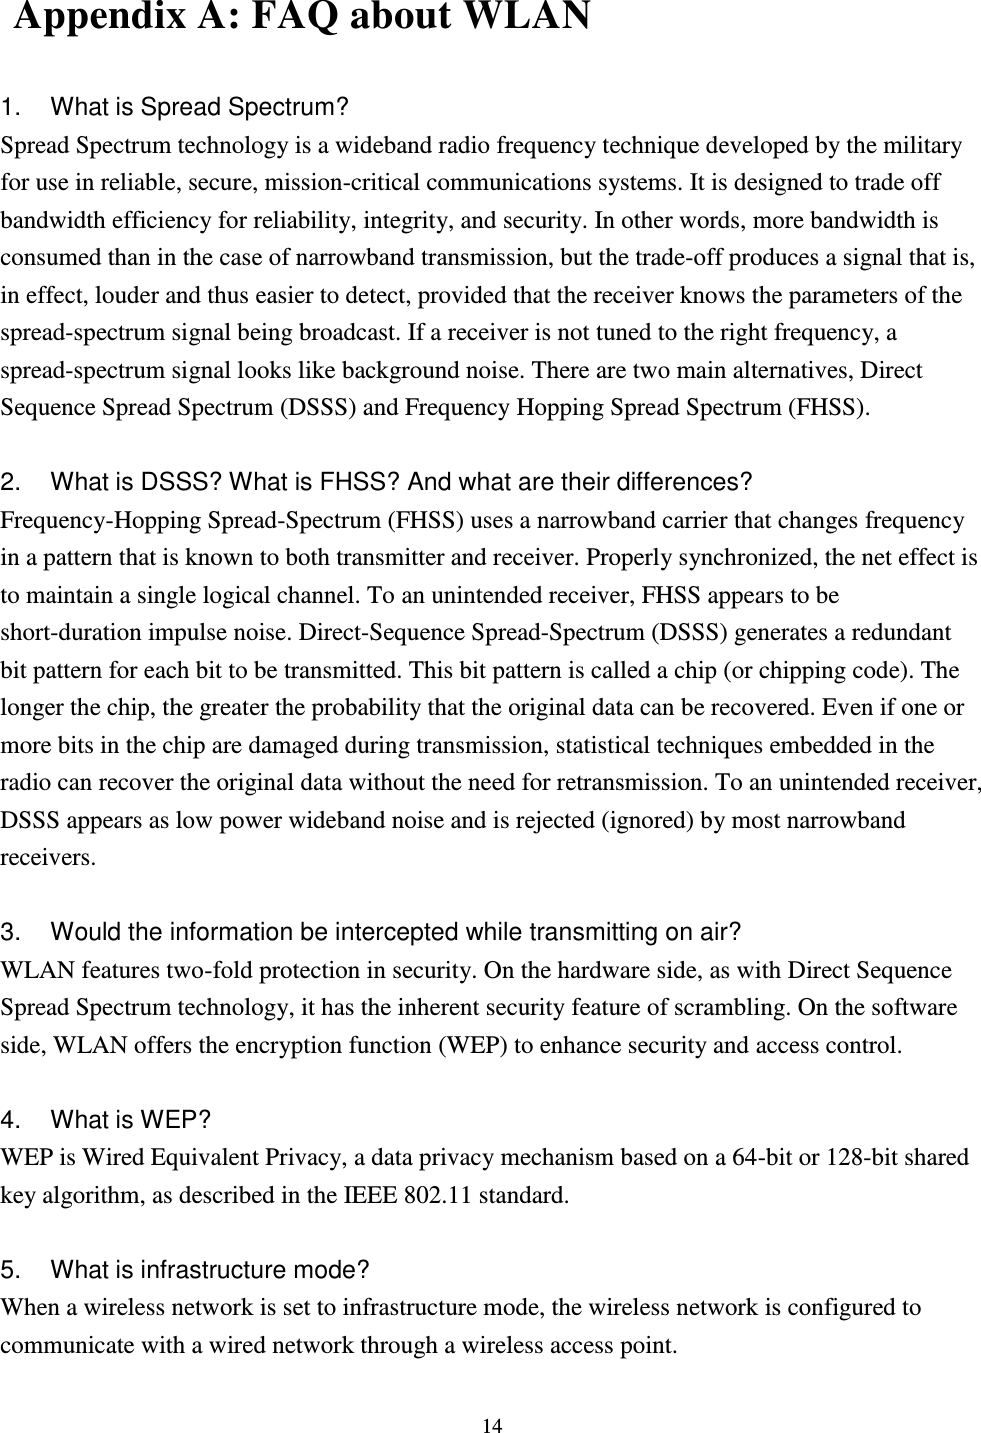  14   Appendix A: FAQ about WLAN  1.  What is Spread Spectrum? Spread Spectrum technology is a wideband radio frequency technique developed by the military for use in reliable, secure, mission-critical communications systems. It is designed to trade off bandwidth efficiency for reliability, integrity, and security. In other words, more bandwidth is consumed than in the case of narrowband transmission, but the trade-off produces a signal that is, in effect, louder and thus easier to detect, provided that the receiver knows the parameters of the spread-spectrum signal being broadcast. If a receiver is not tuned to the right frequency, a spread-spectrum signal looks like background noise. There are two main alternatives, Direct Sequence Spread Spectrum (DSSS) and Frequency Hopping Spread Spectrum (FHSS).  2.  What is DSSS? What is FHSS? And what are their differences? Frequency-Hopping Spread-Spectrum (FHSS) uses a narrowband carrier that changes frequency in a pattern that is known to both transmitter and receiver. Properly synchronized, the net effect is to maintain a single logical channel. To an unintended receiver, FHSS appears to be short-duration impulse noise. Direct-Sequence Spread-Spectrum (DSSS) generates a redundant bit pattern for each bit to be transmitted. This bit pattern is called a chip (or chipping code). The longer the chip, the greater the probability that the original data can be recovered. Even if one or more bits in the chip are damaged during transmission, statistical techniques embedded in the radio can recover the original data without the need for retransmission. To an unintended receiver, DSSS appears as low power wideband noise and is rejected (ignored) by most narrowband receivers.  3.  Would the information be intercepted while transmitting on air? WLAN features two-fold protection in security. On the hardware side, as with Direct Sequence Spread Spectrum technology, it has the inherent security feature of scrambling. On the software side, WLAN offers the encryption function (WEP) to enhance security and access control.  4.  What is WEP? WEP is Wired Equivalent Privacy, a data privacy mechanism based on a 64-bit or 128-bit shared key algorithm, as described in the IEEE 802.11 standard.    5.  What is infrastructure mode? When a wireless network is set to infrastructure mode, the wireless network is configured to communicate with a wired network through a wireless access point. 